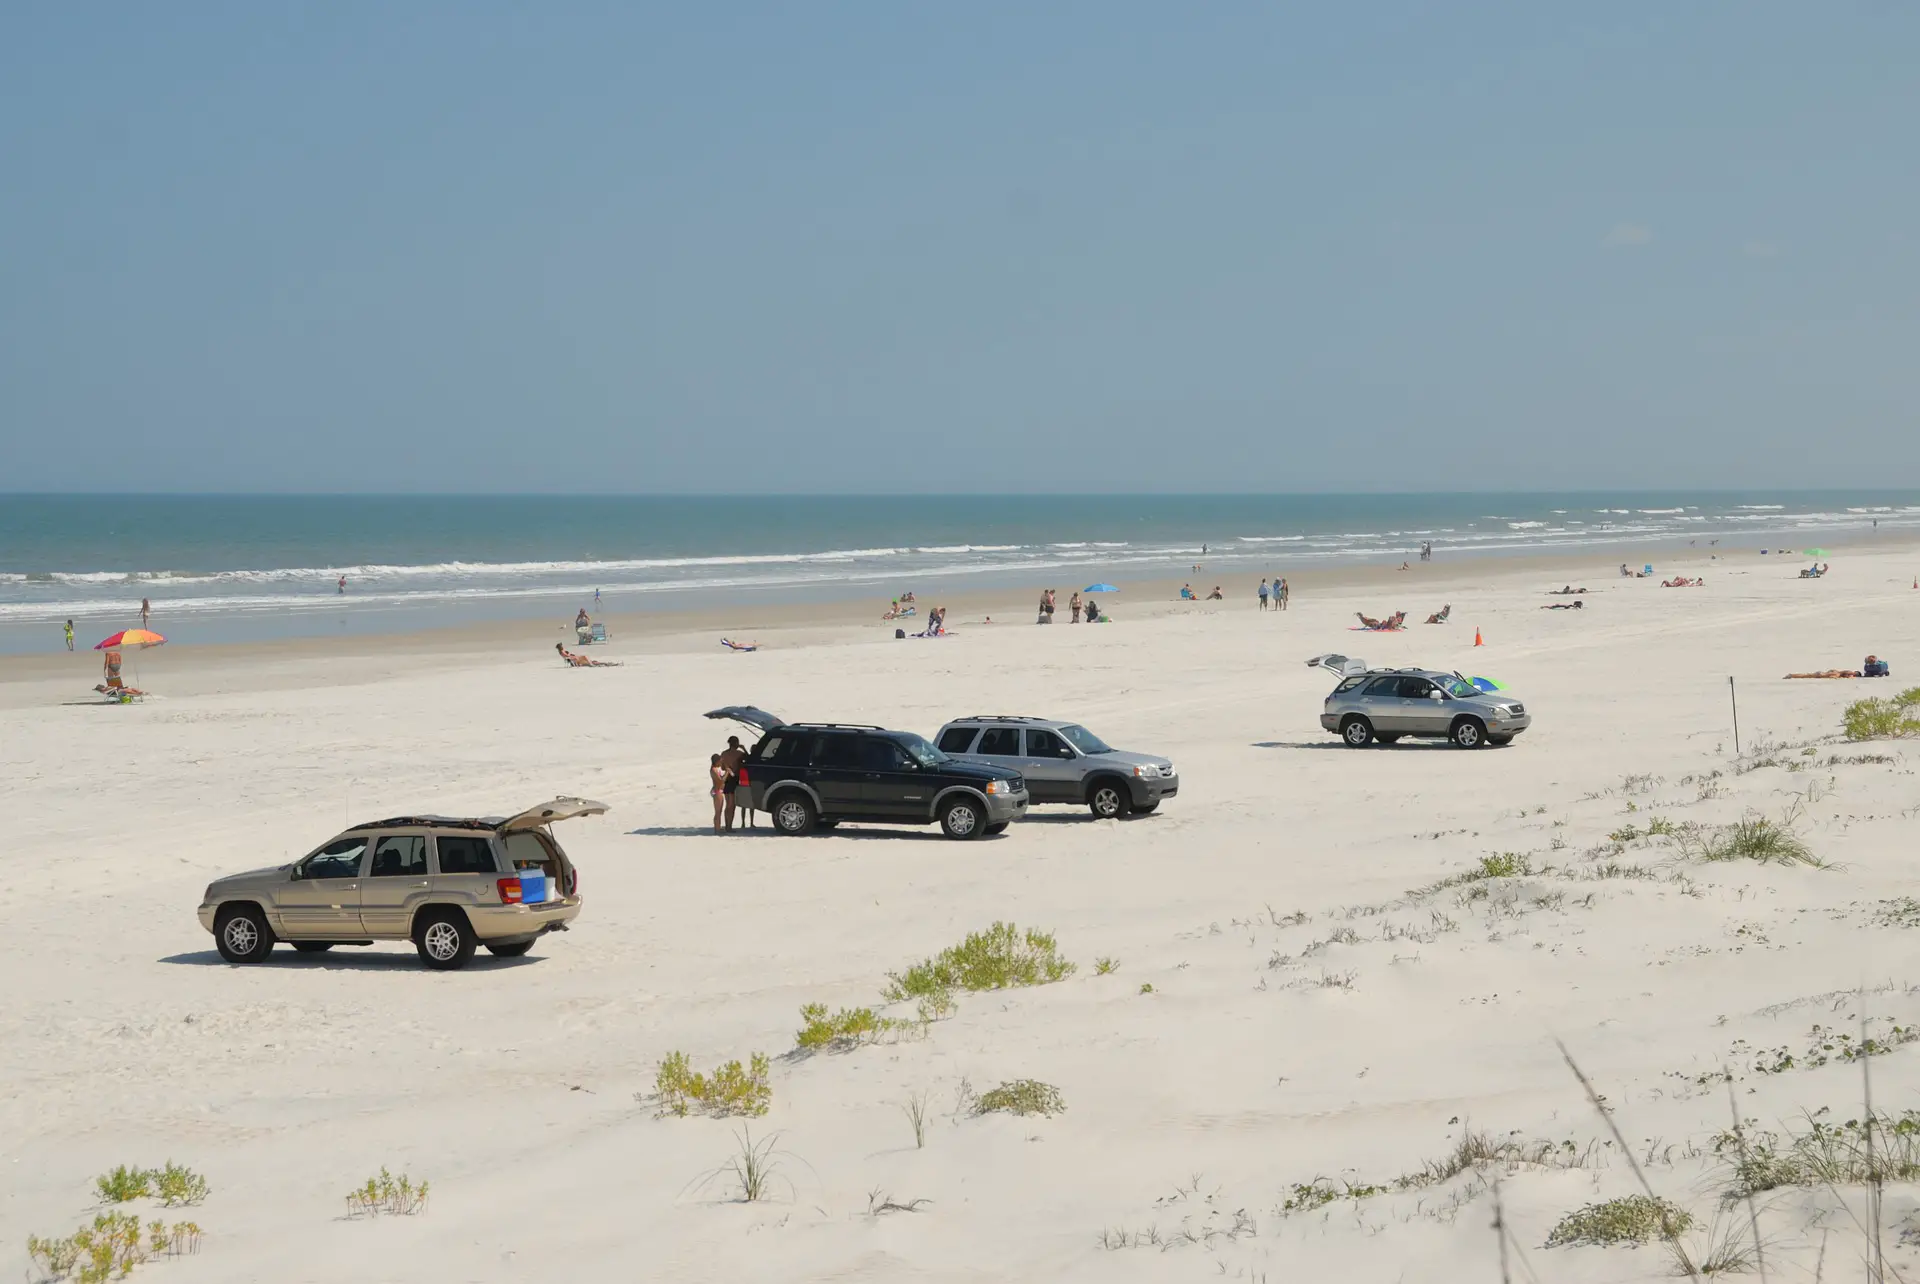 SUV's parked along the beach